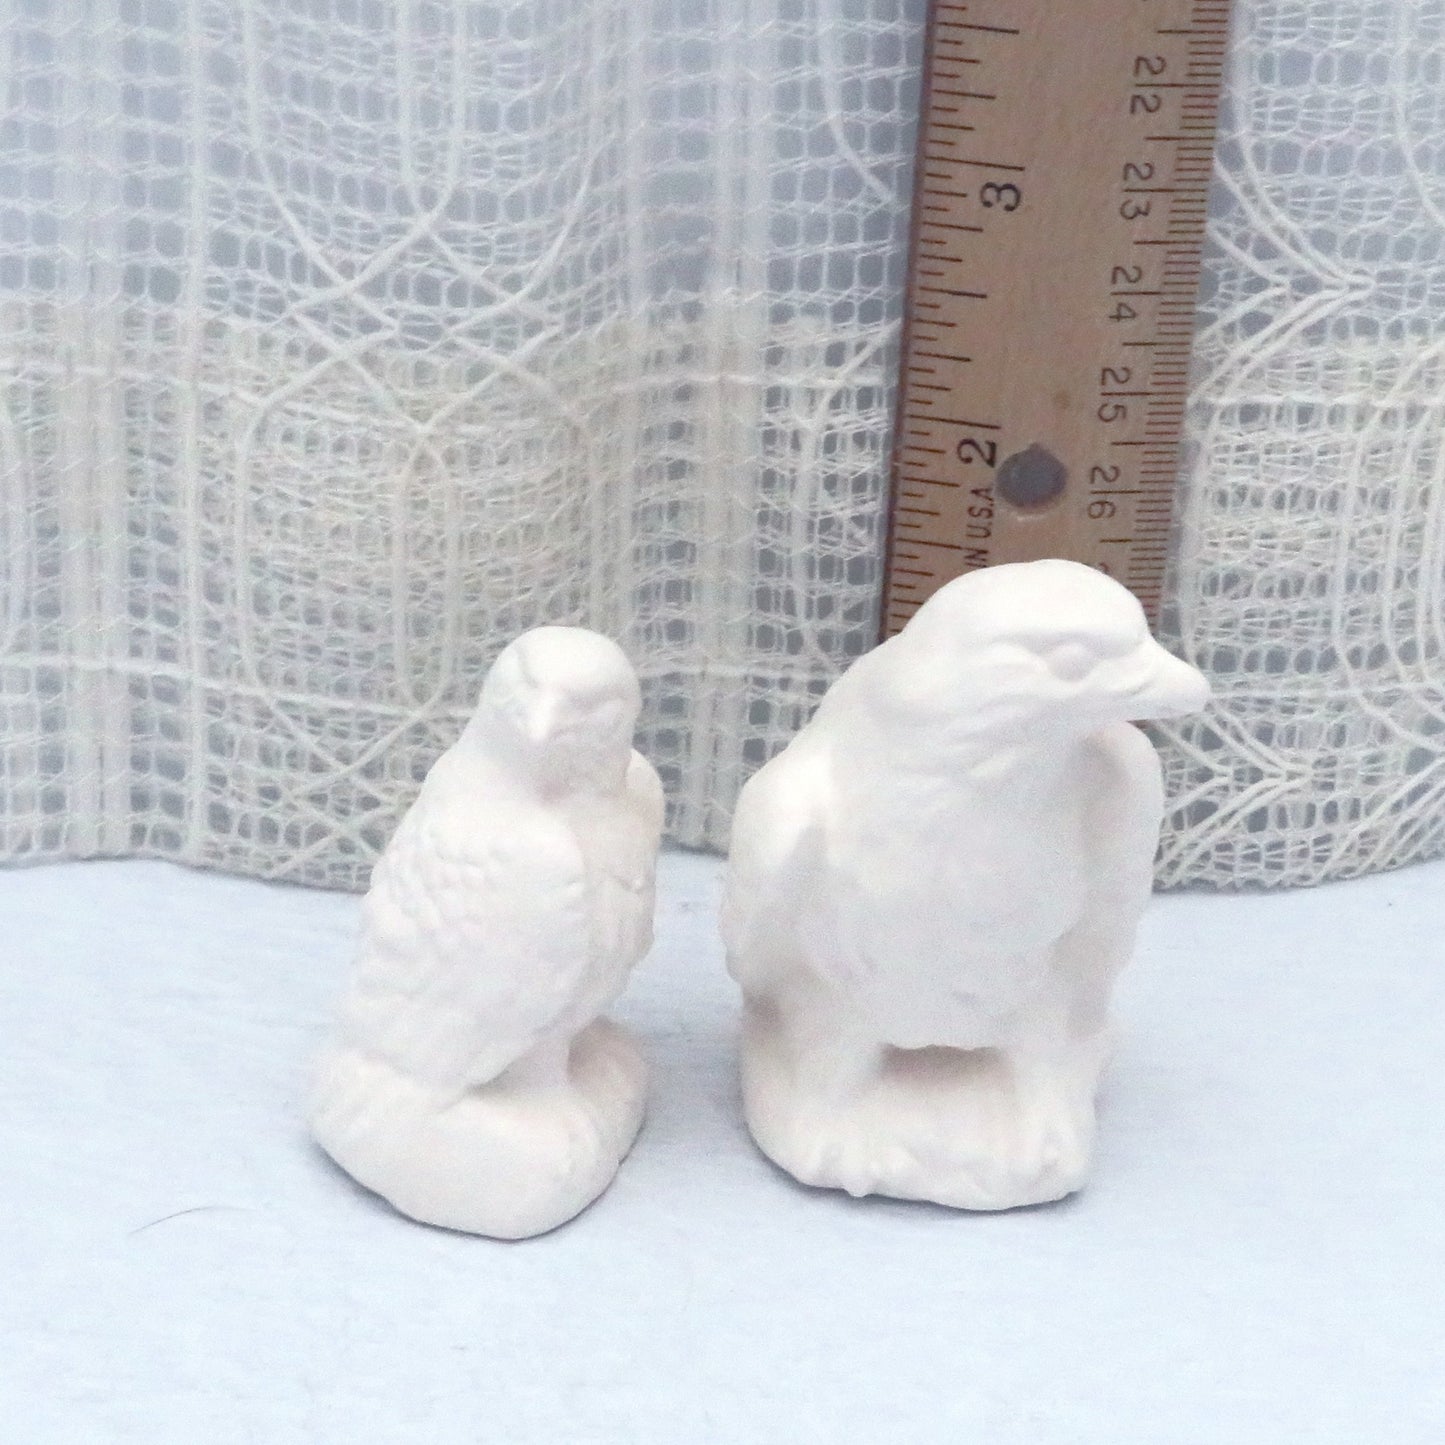 2 small ceramic bisqueware eagle figurines near a ruler showing the taller eagle to be approximately